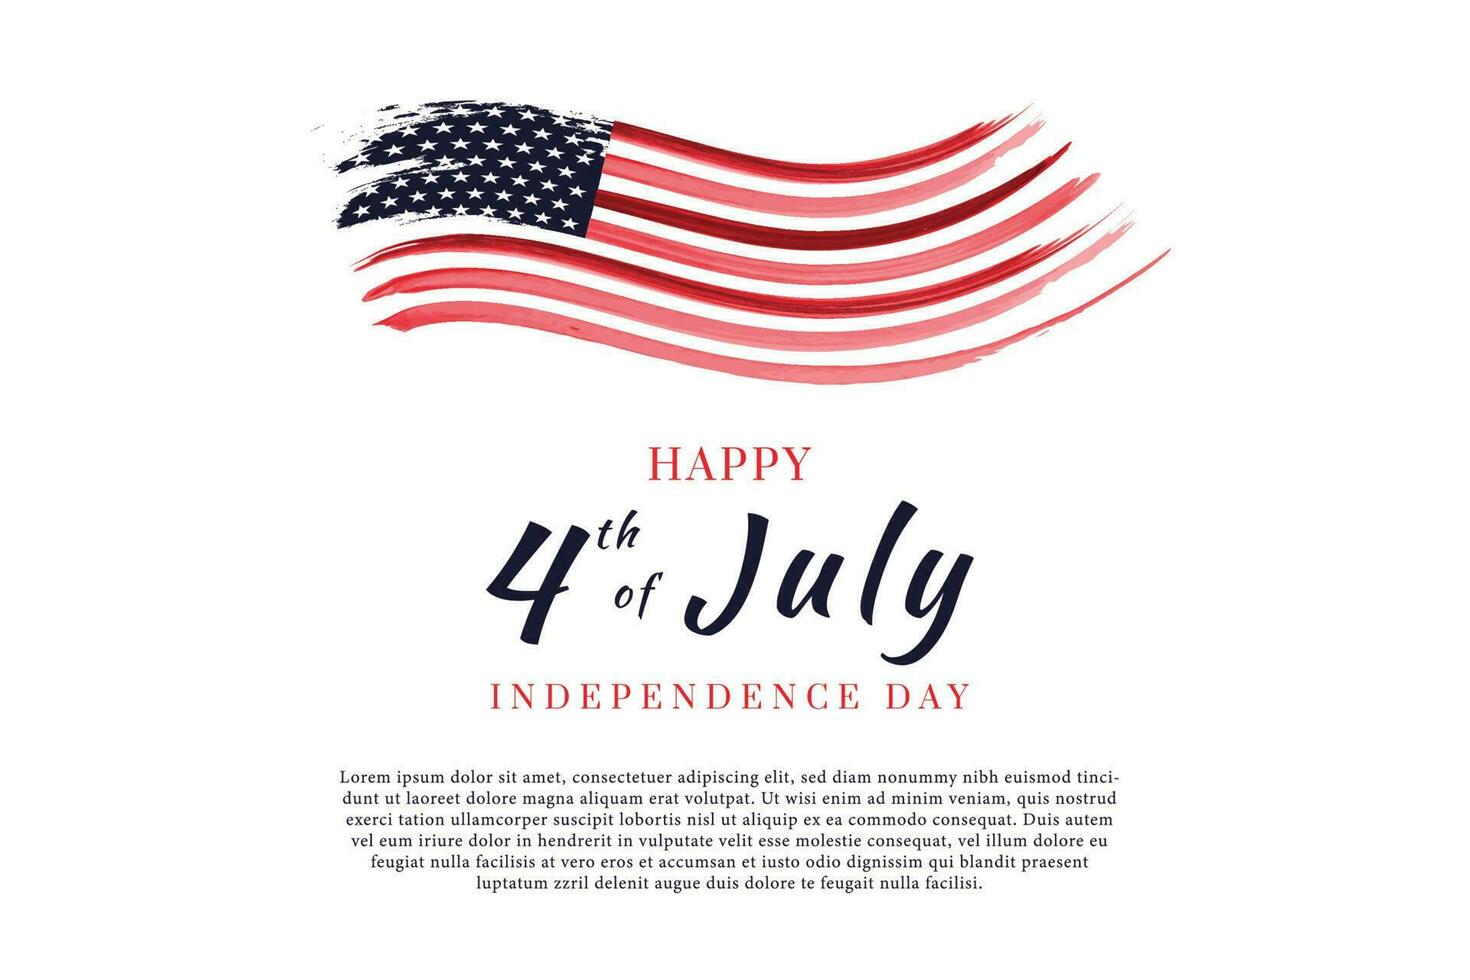 4th of July Background. USA Independence Day Background with United States flag and Lettering text happy Independence day. vector